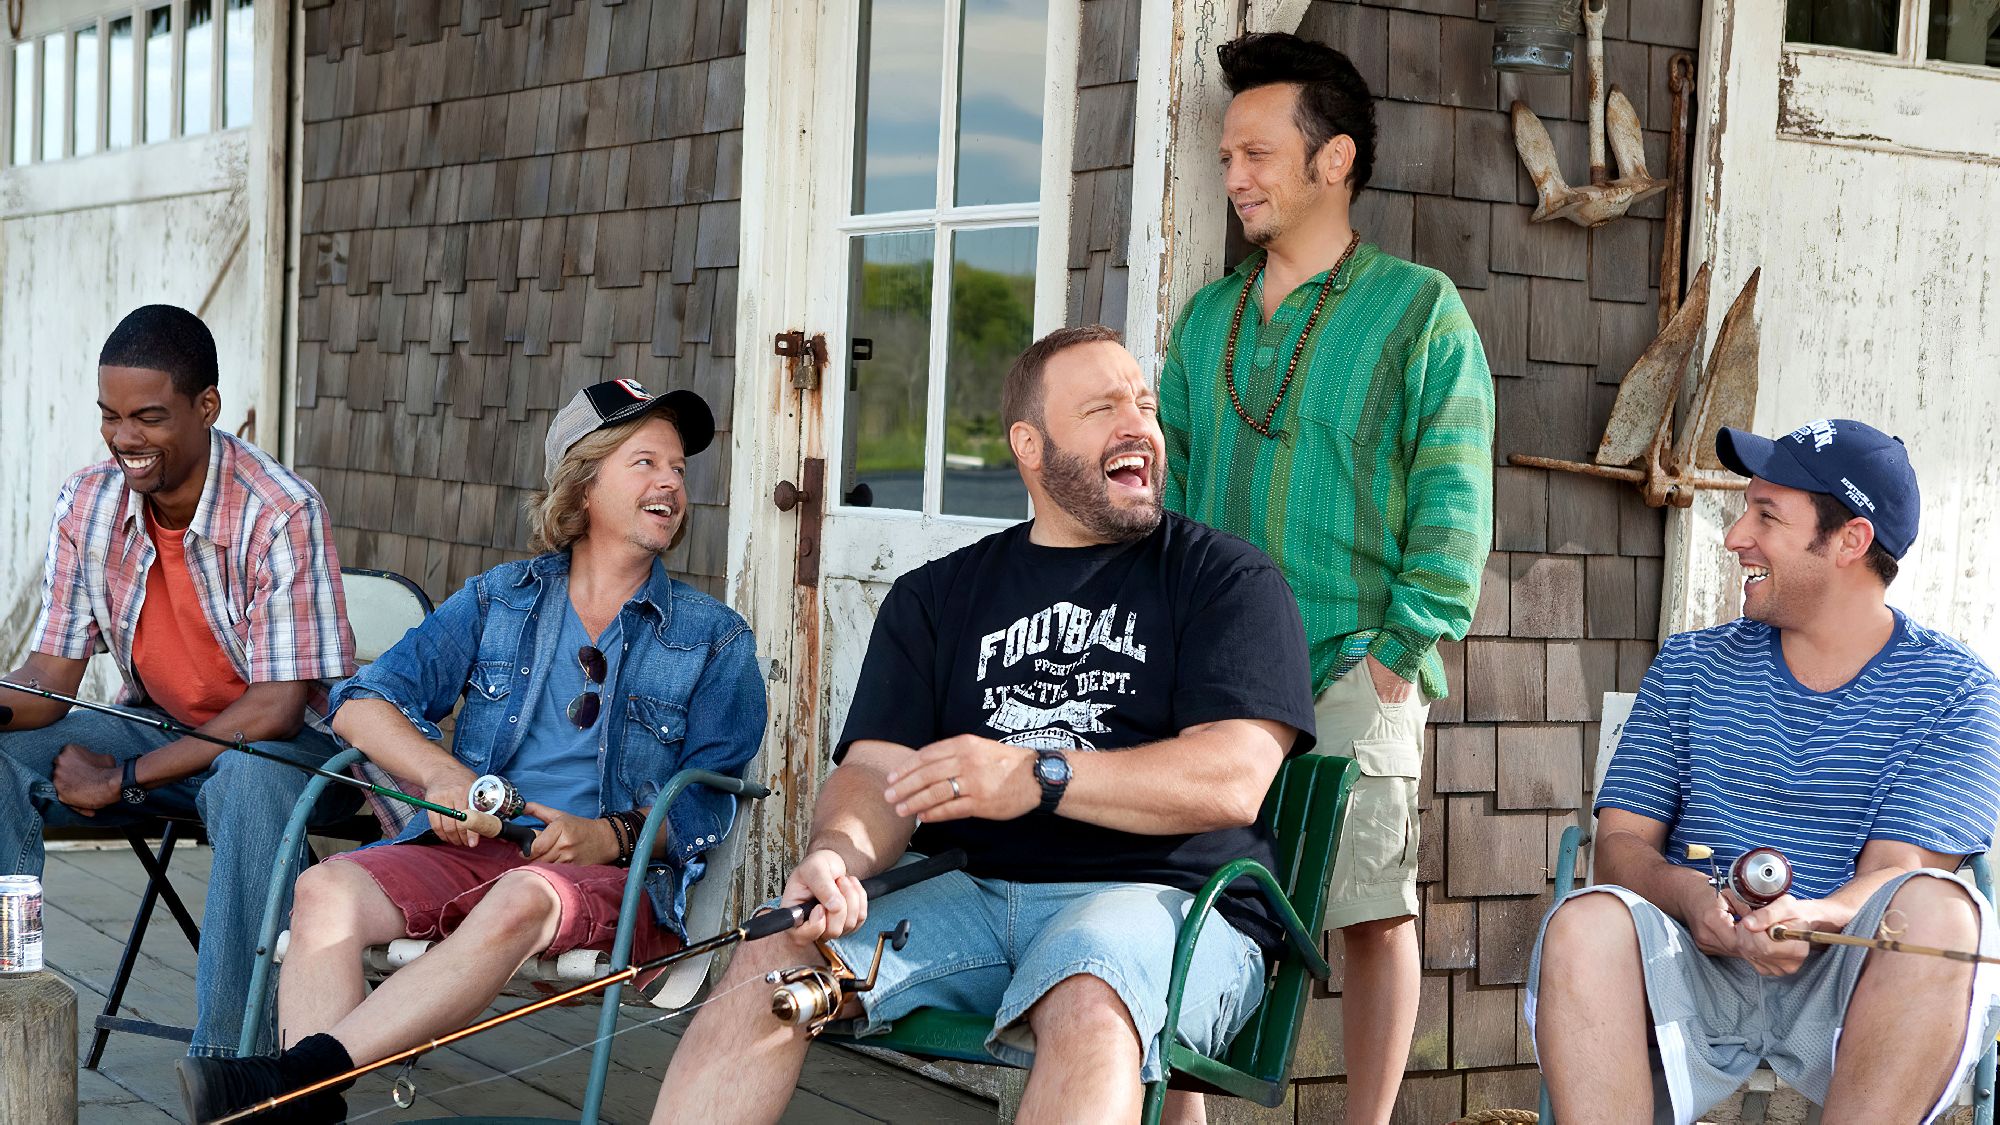 In "They are like children"Also starring are Kevin James, David Space, Chris Rock and Rob Schneider.  (Netflix)